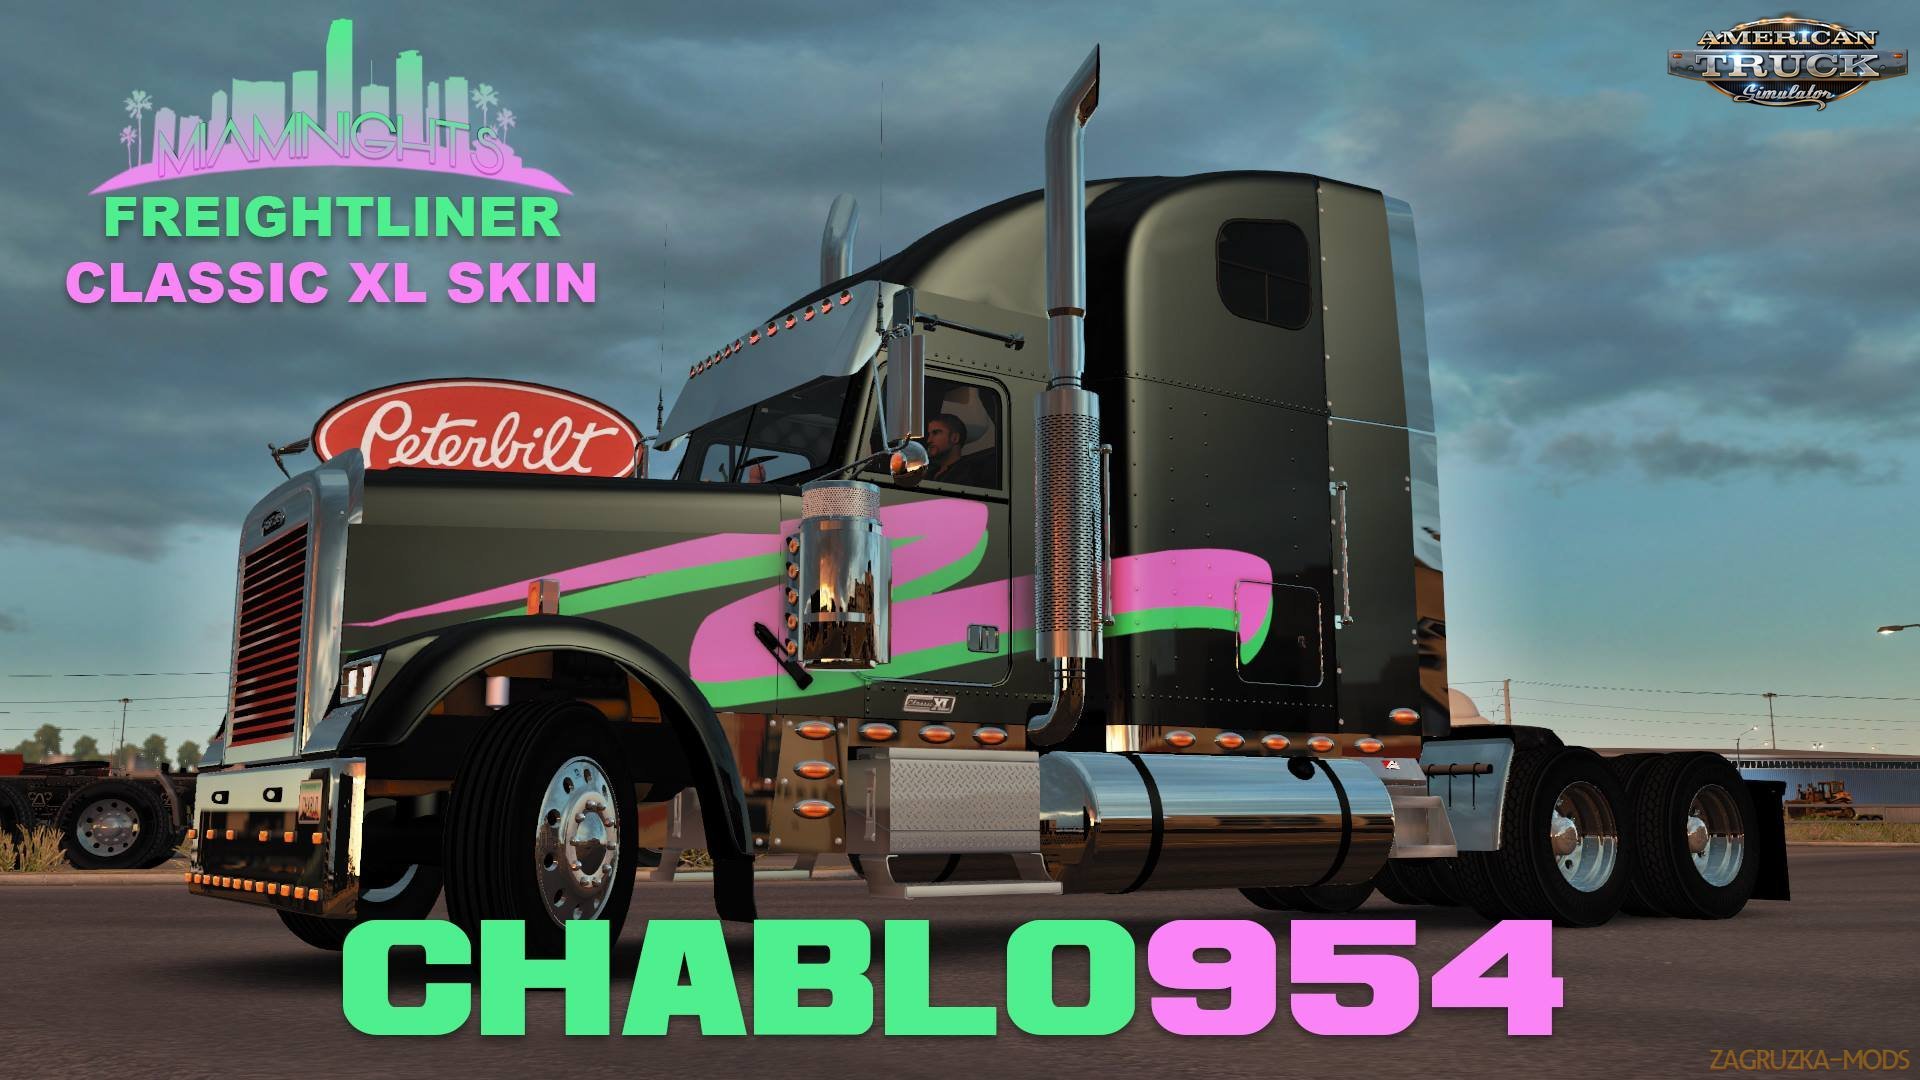 Miami Nights Skin for Freightliner Classic XL v1.0 by Chablo954 (1.31.x) for ATS